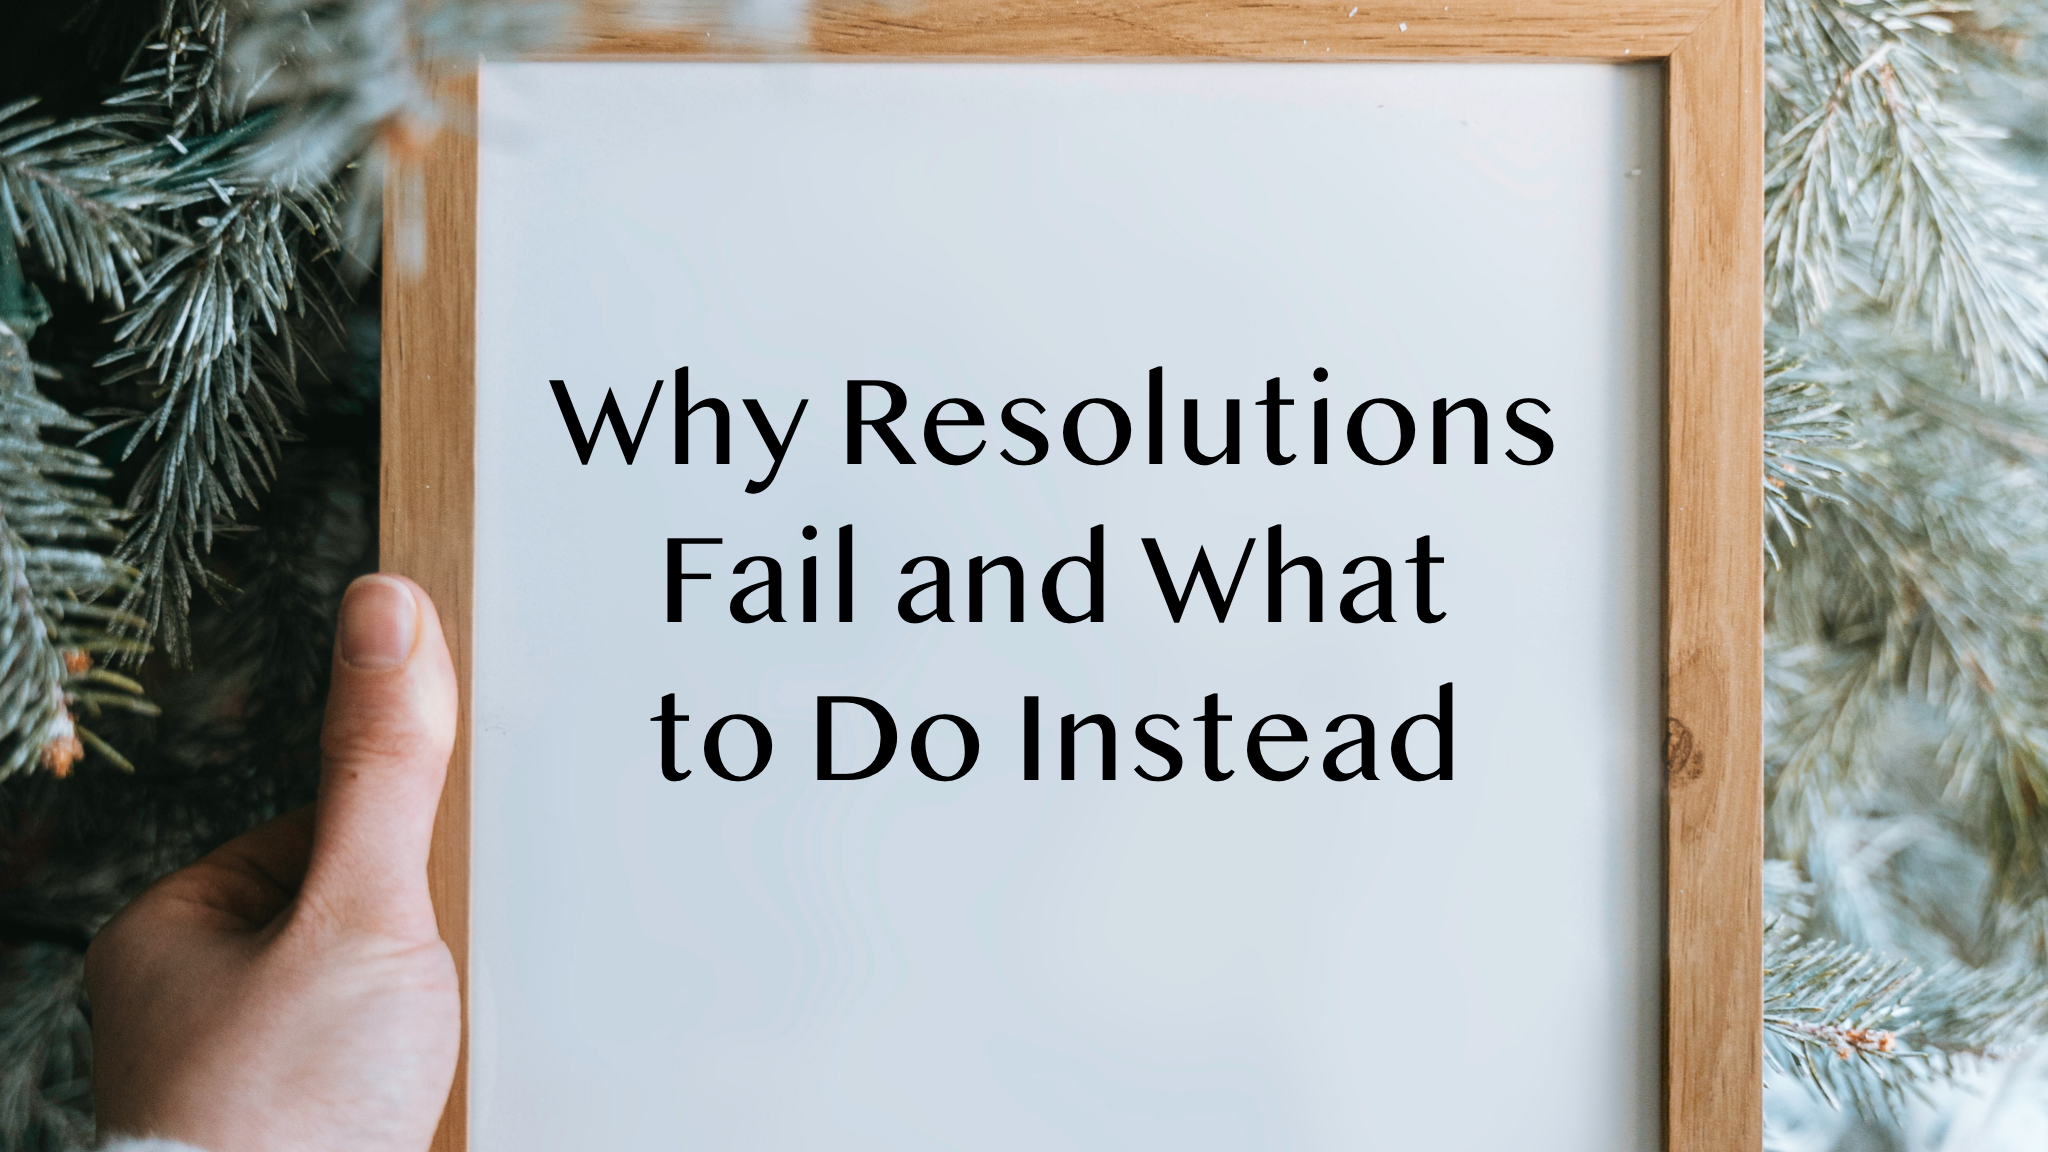 Background is a pine tree with a hand holding up an eraseable whiteboard with blog post topic "Why Resolutions Fail and What do Do Instead"